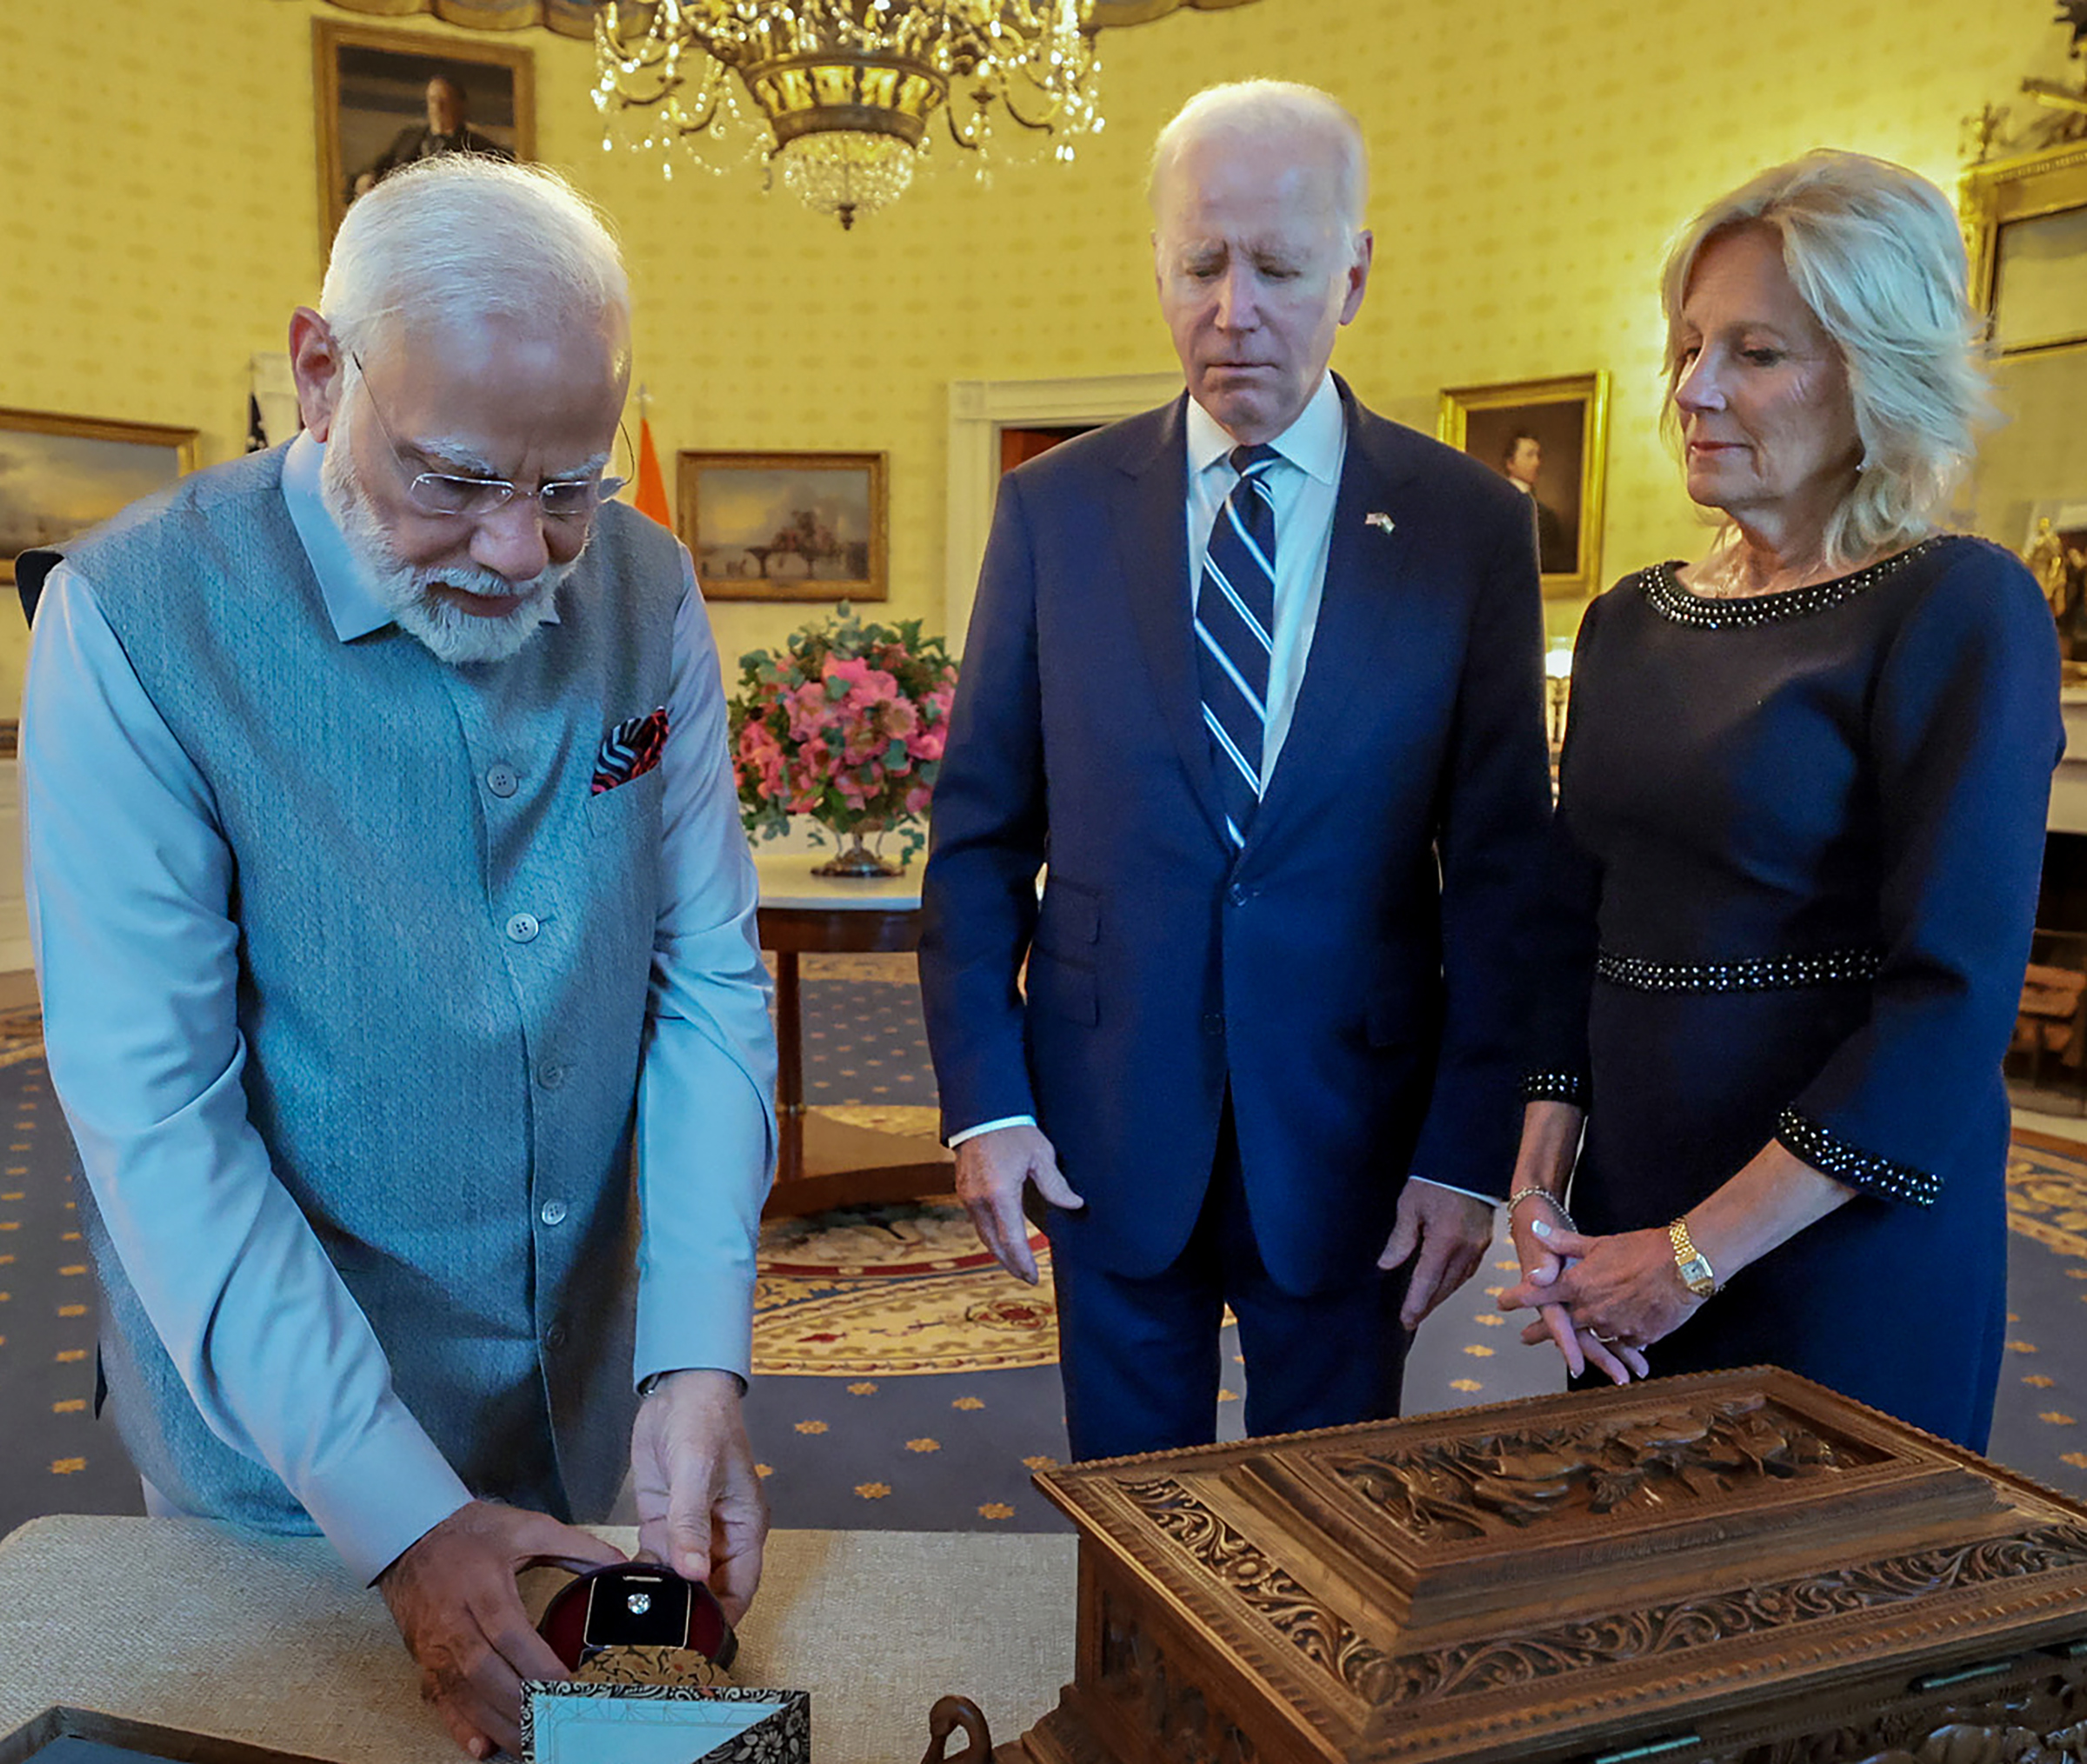 Prime Minister Narendra Modi gifts to the U.S. First Lady Dr. Jill Biden a lab-grown 7.5-carat green diamond in the presence of the U.S. President Joe Biden at the White House on June 22, 2023. (ANI/Reuters)